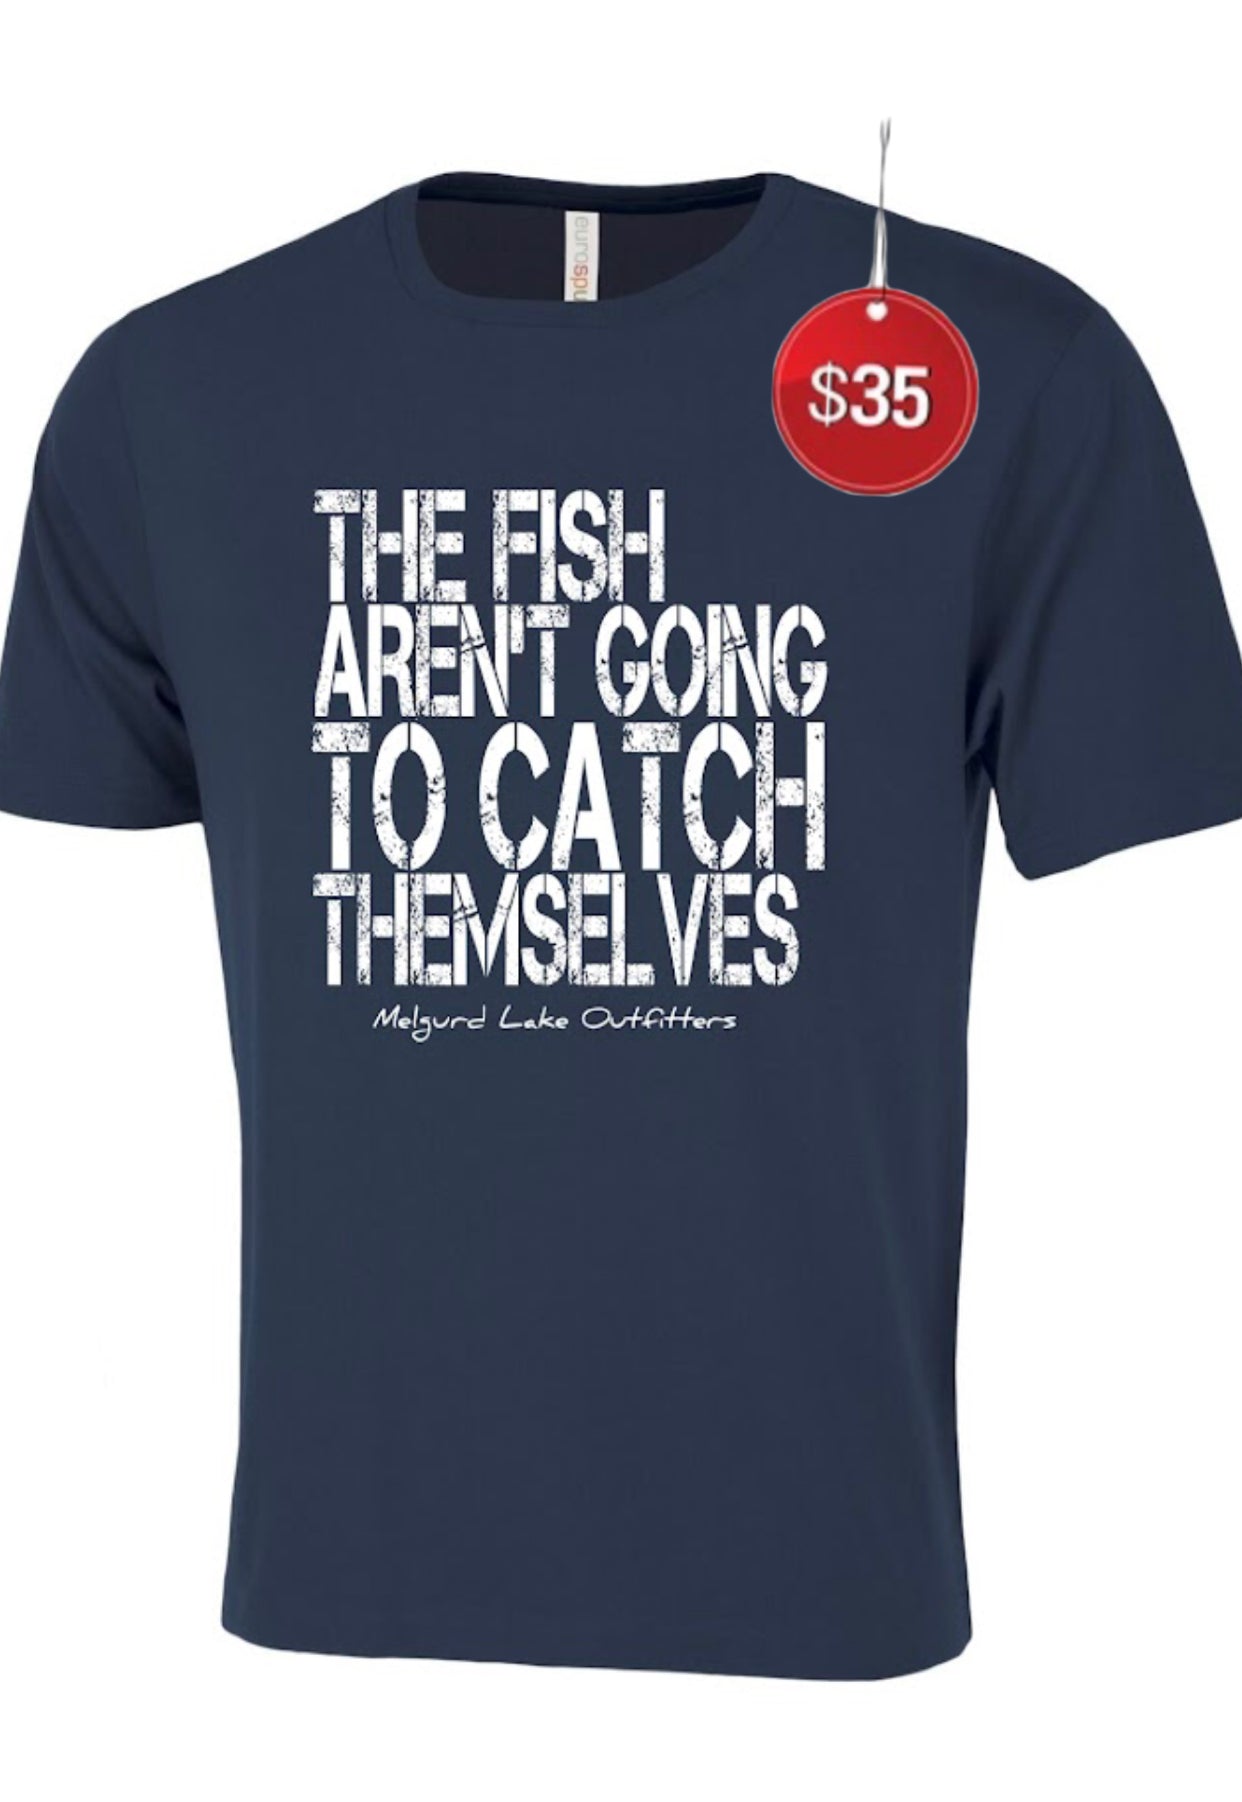 at Navy $15 Catch Lake chec taken Melgurd Discount Outfitters - – Tee Edition Themselves Limited